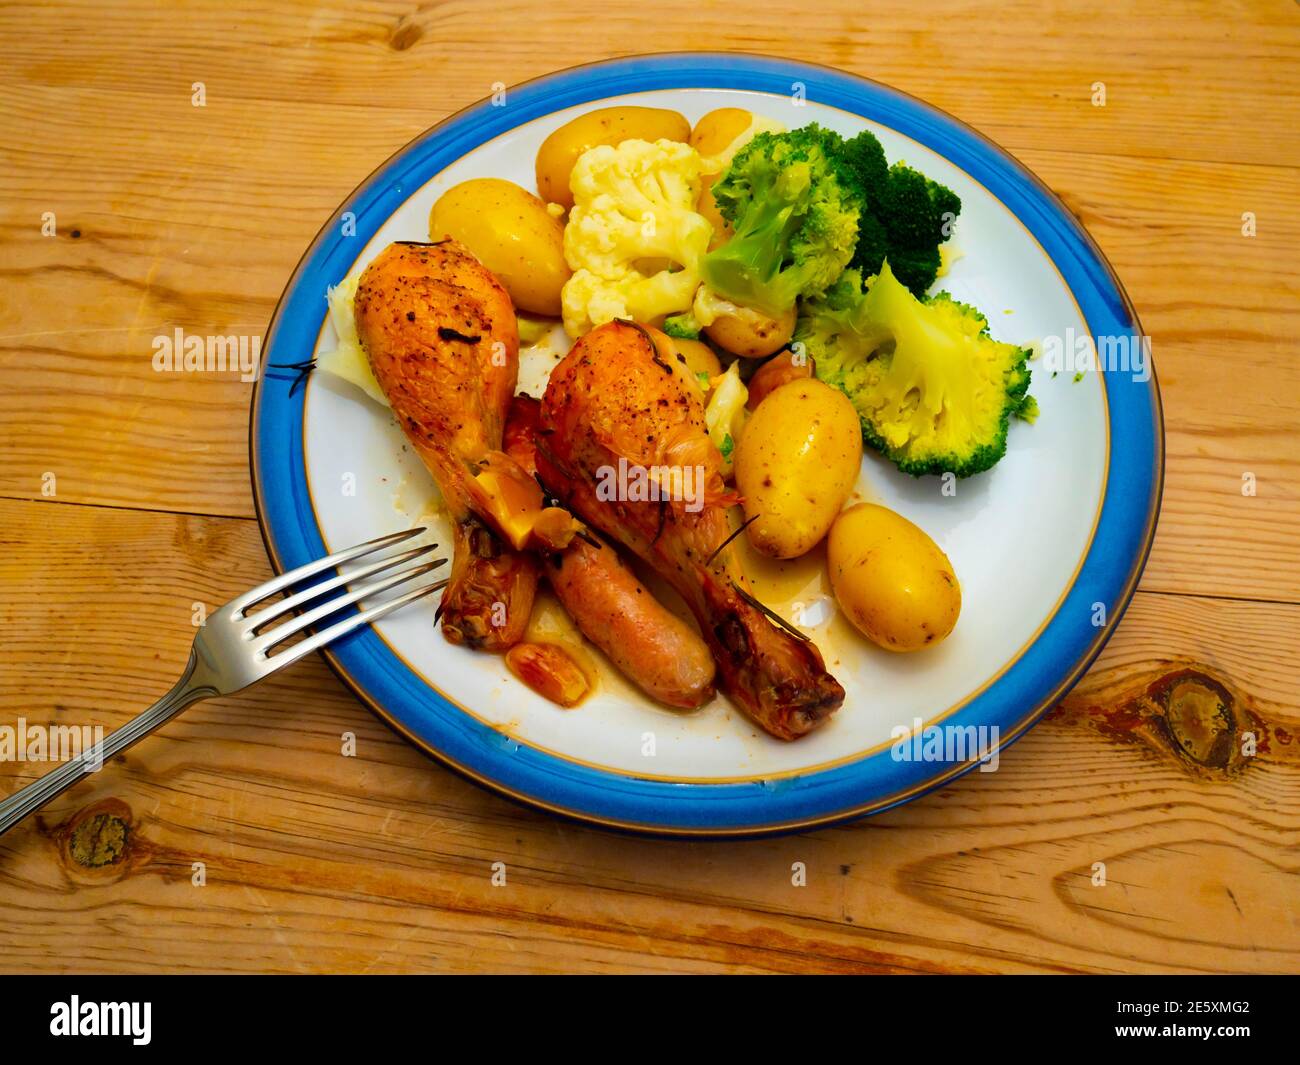 Decompose Blot persecution Lunch main course chicken drumsticks with sausages broccoli cauliflower and  new potatoes on a white plate blue edge wooden table top with cutlery Stock  Photo - Alamy